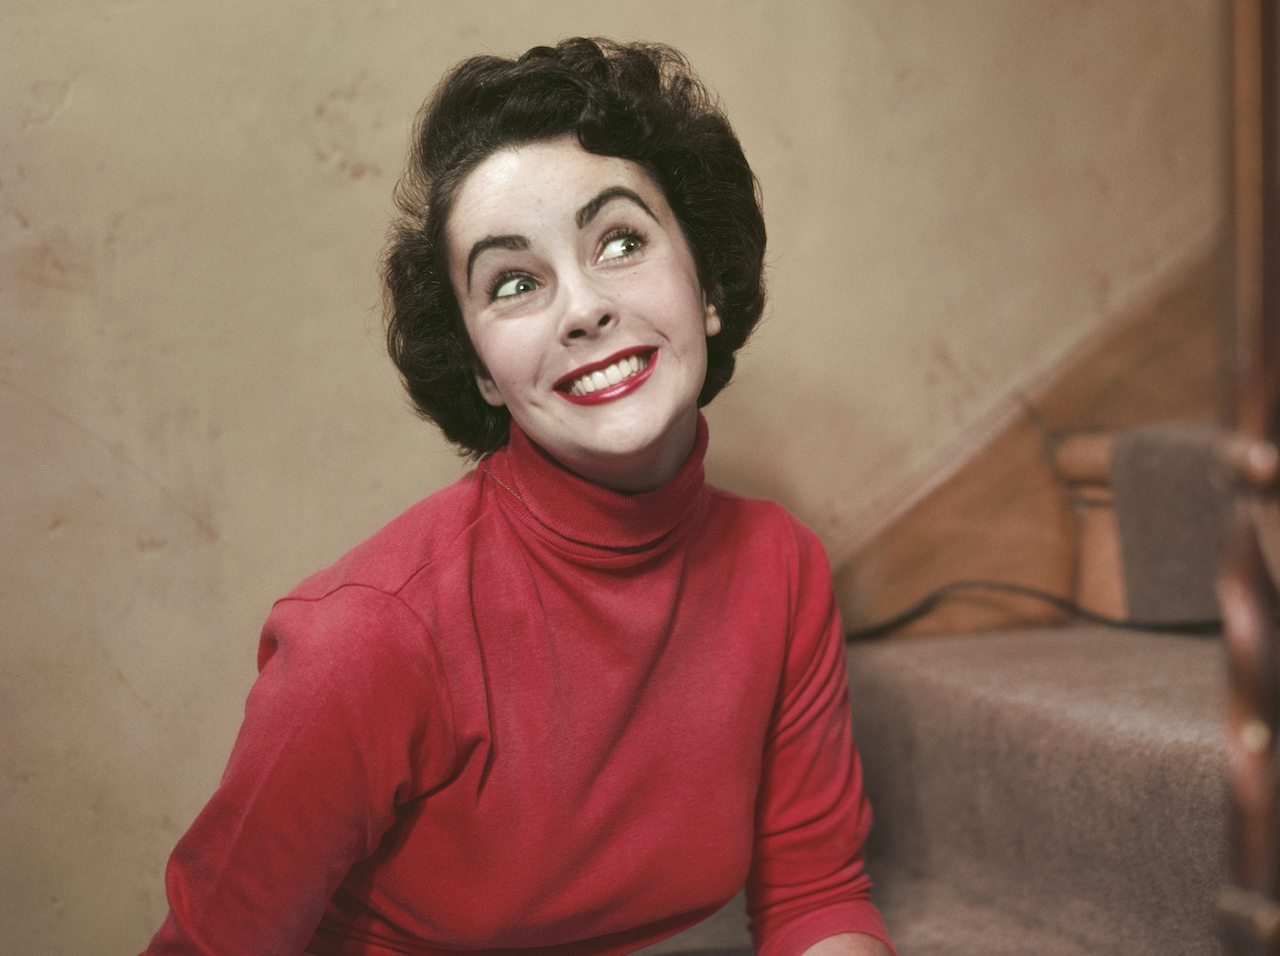 Elizabeth Taylor seated on stairs, dressed in red and smiling 